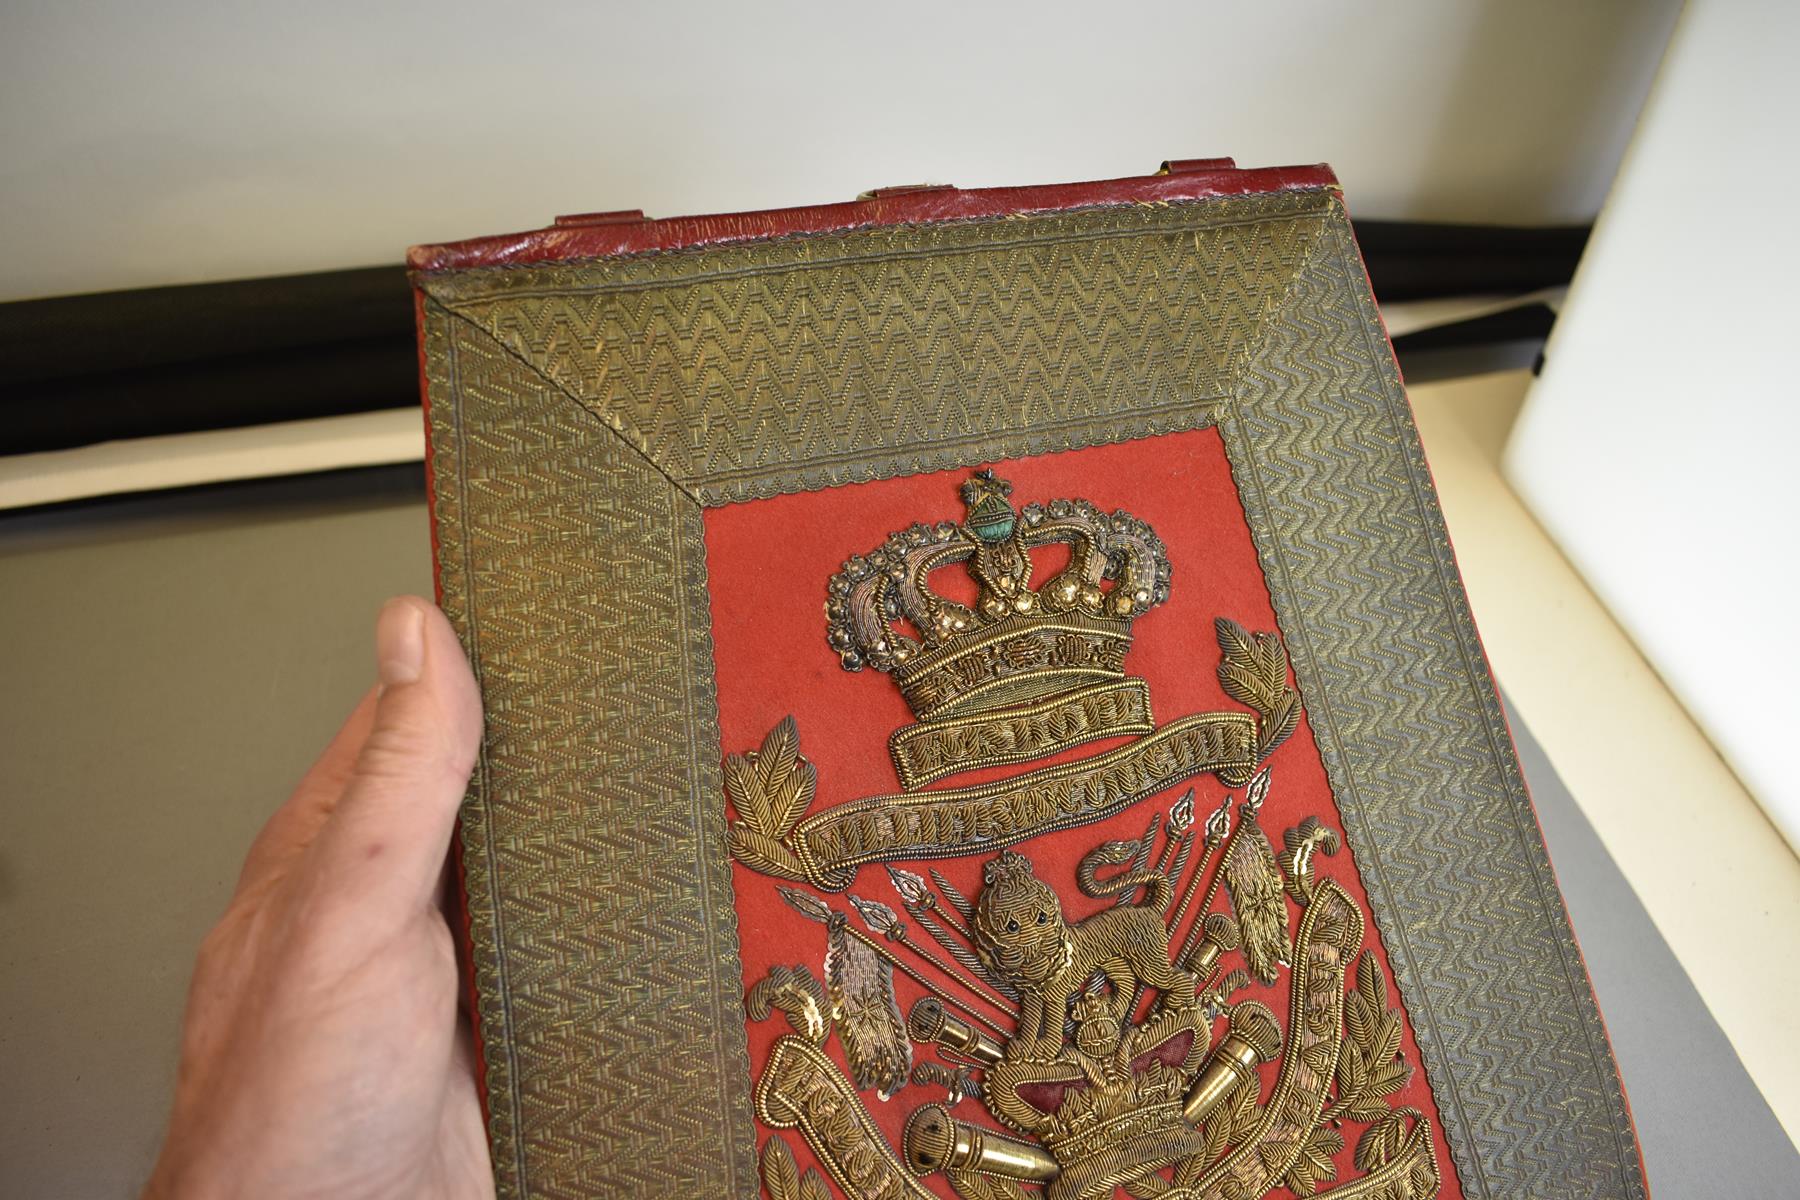 A FINE LARGE SIZE WILLIAM IV 15TH KING'S HUSSARS OFFICER'S SABRETACHE, the red felt flap with - Image 3 of 10